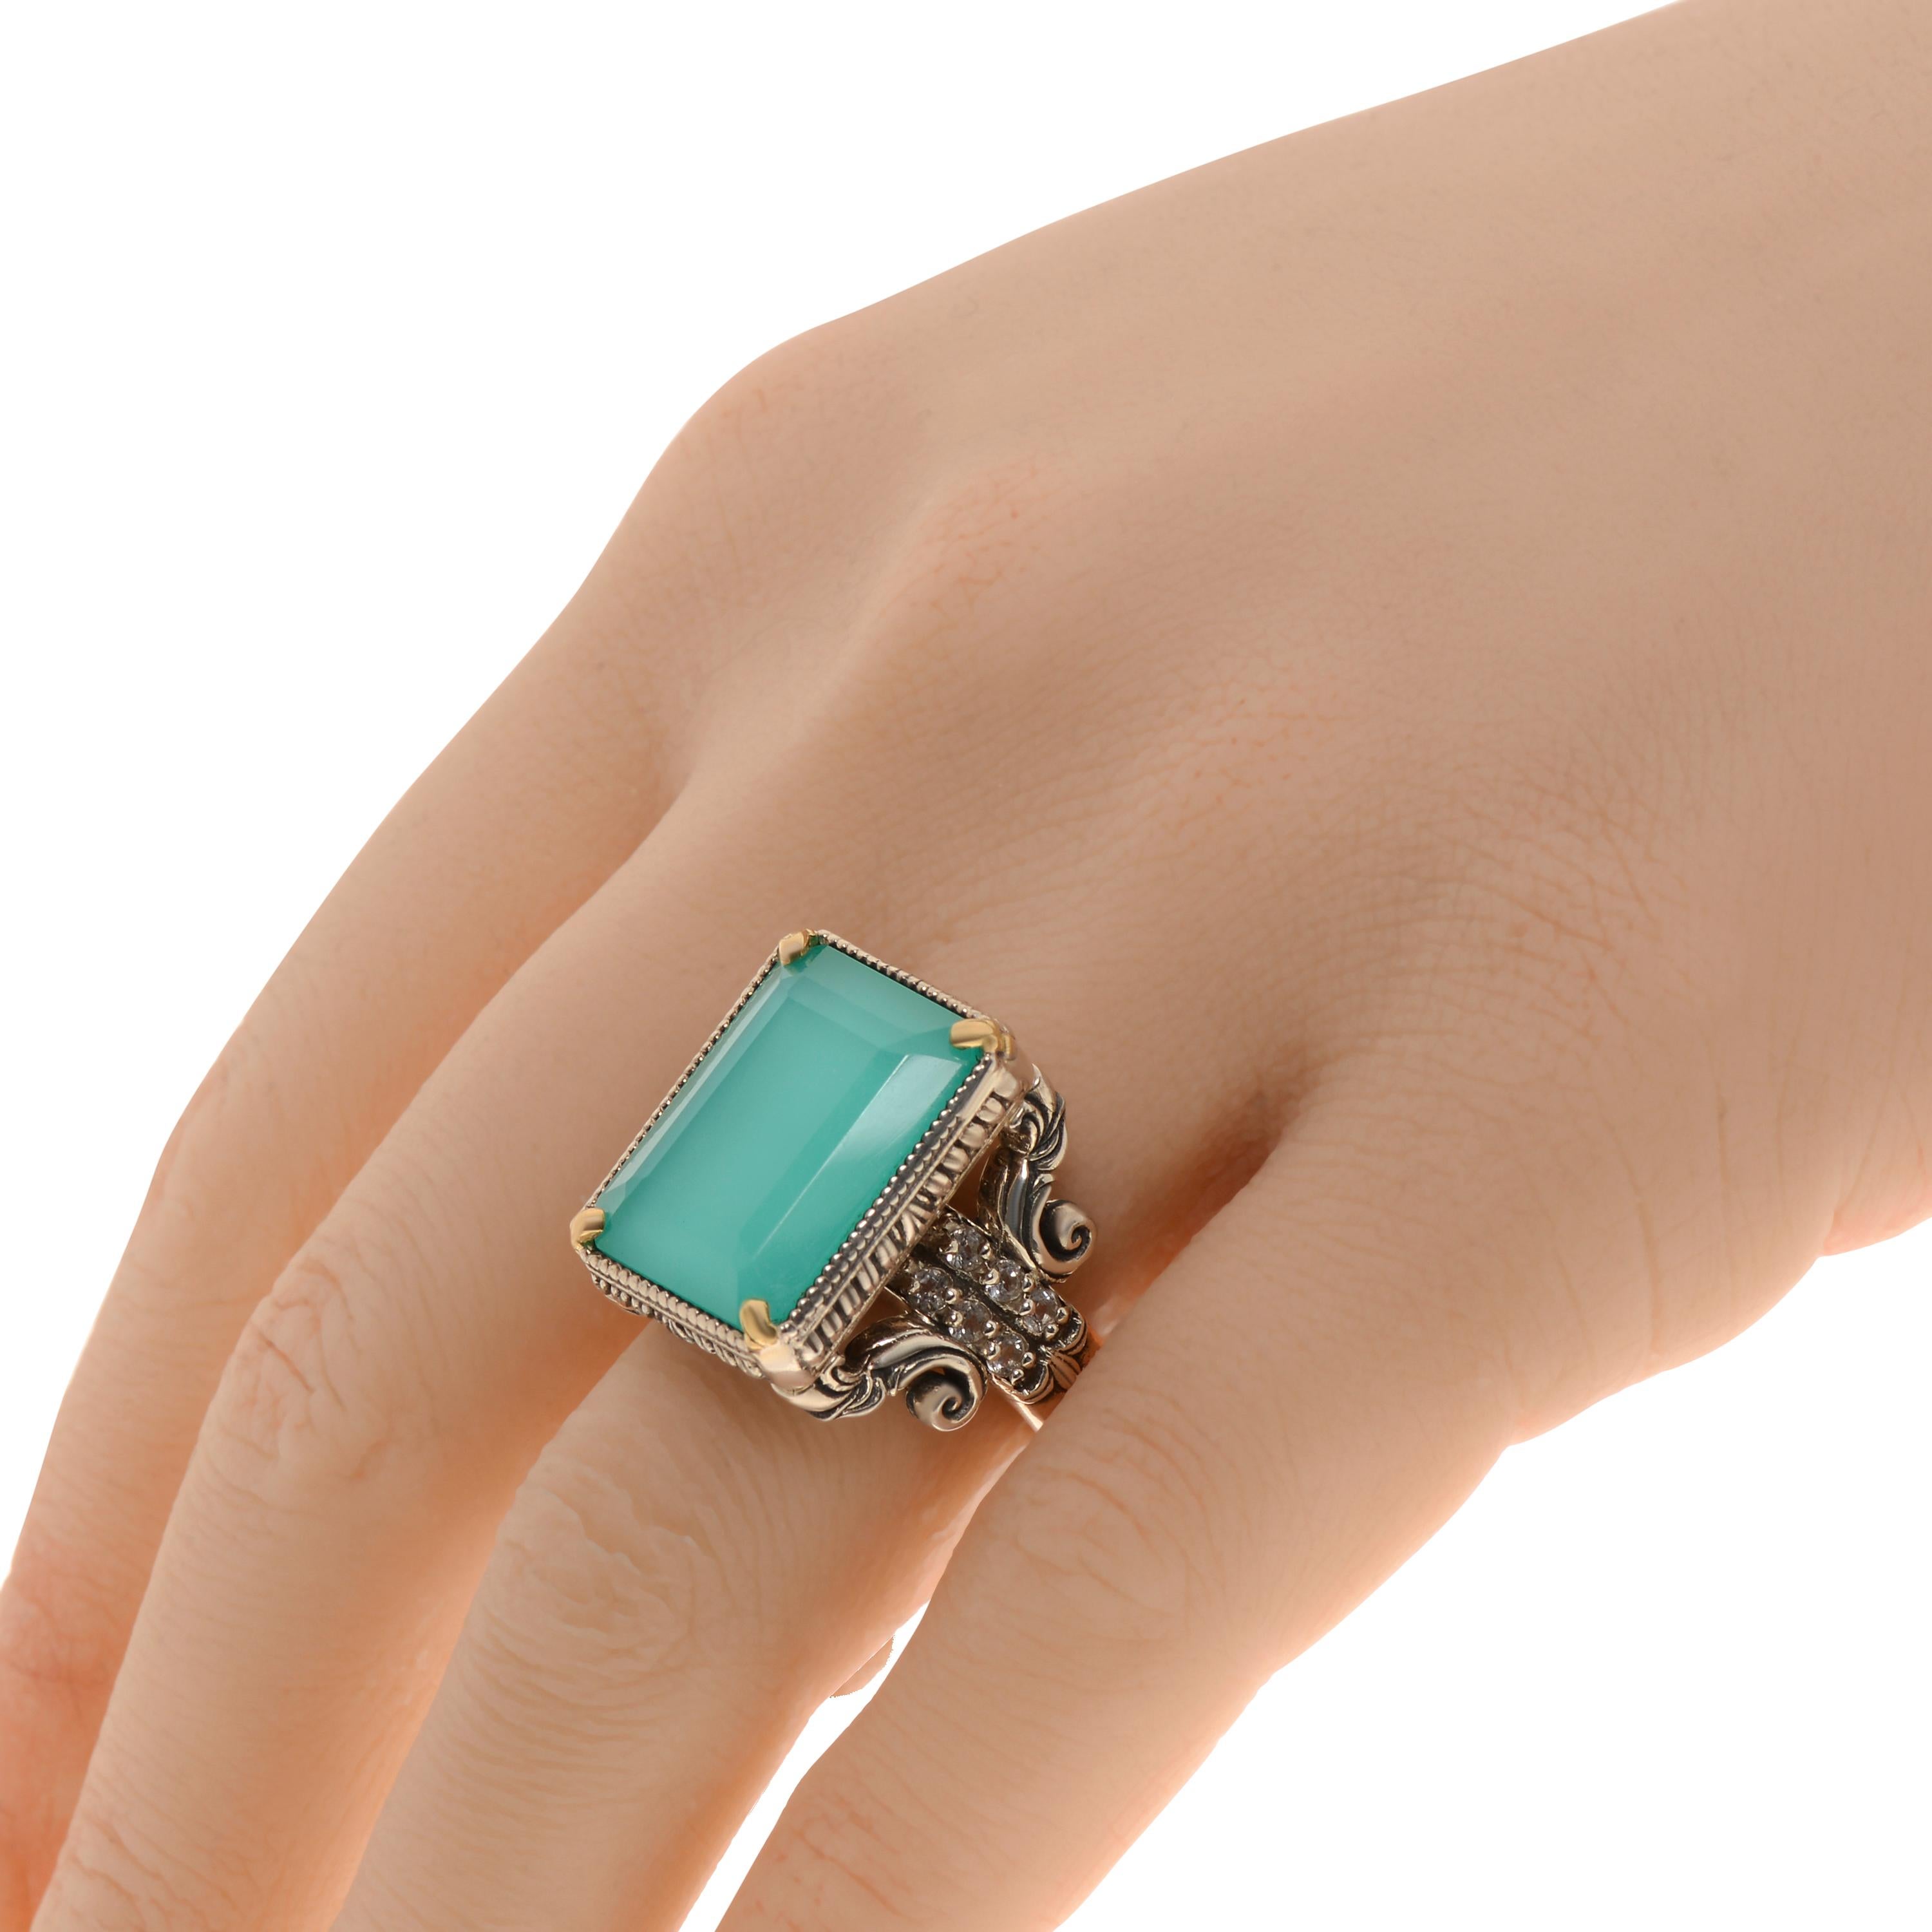 Konstantino Naiads statement ring features a faceted chalcedony doublet with topaz accents. The ring size is 7 (54.4). The total weight is 13.9g.
